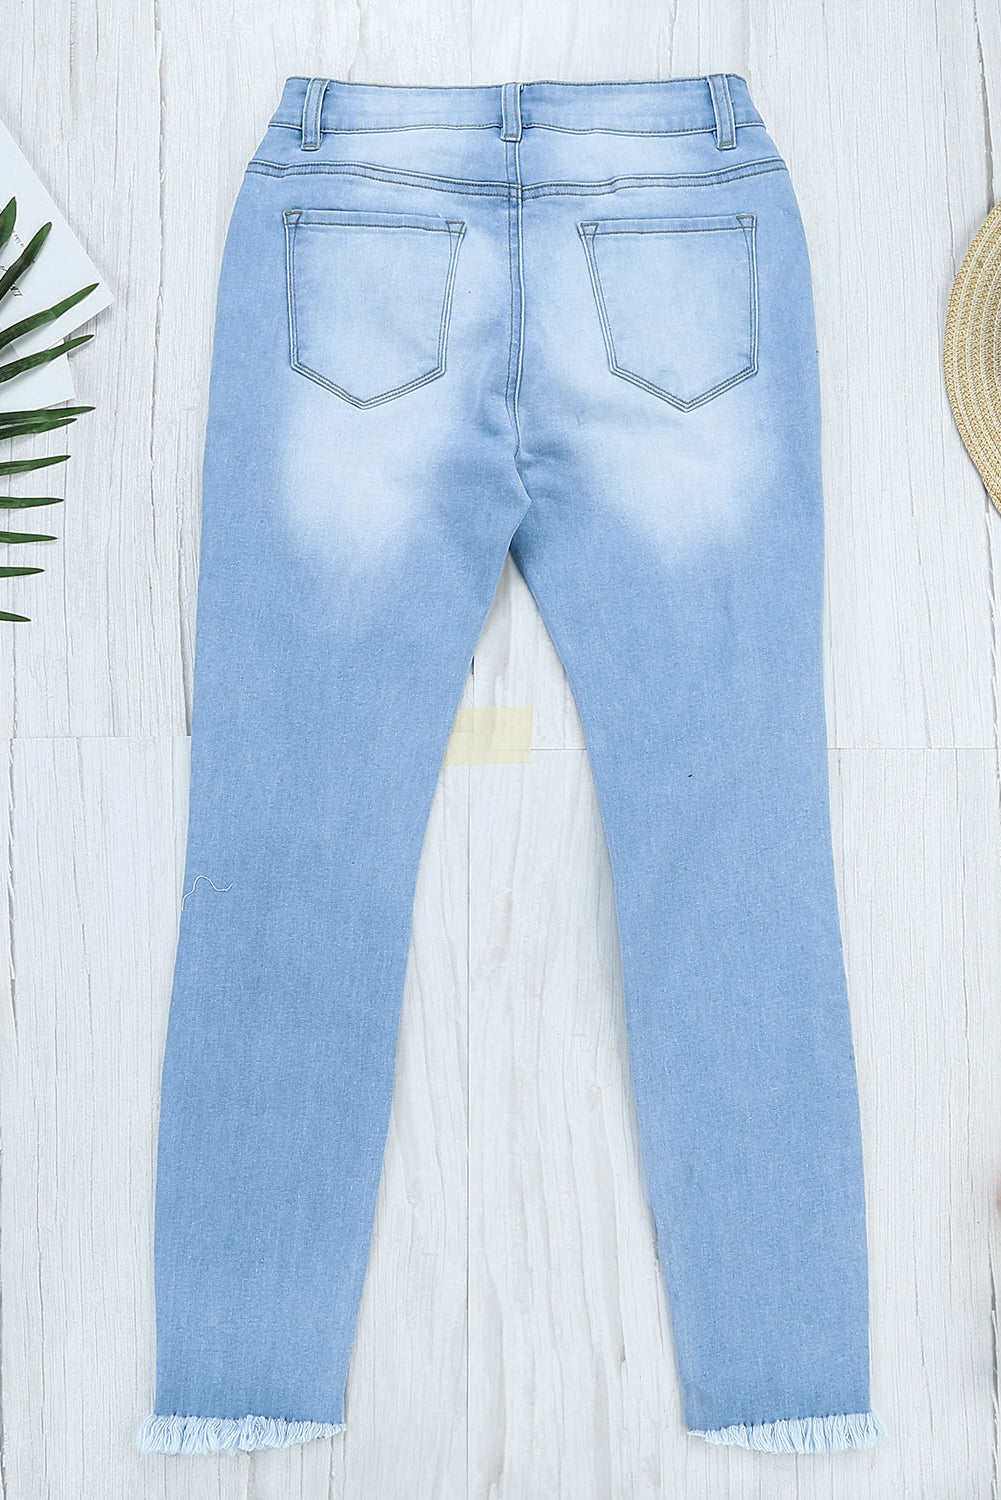 LC78038-4-S, LC78038-4-M, LC78038-4-L, LC78038-4-XL, Sky Blue Light Blue Washed Ripped Jeans